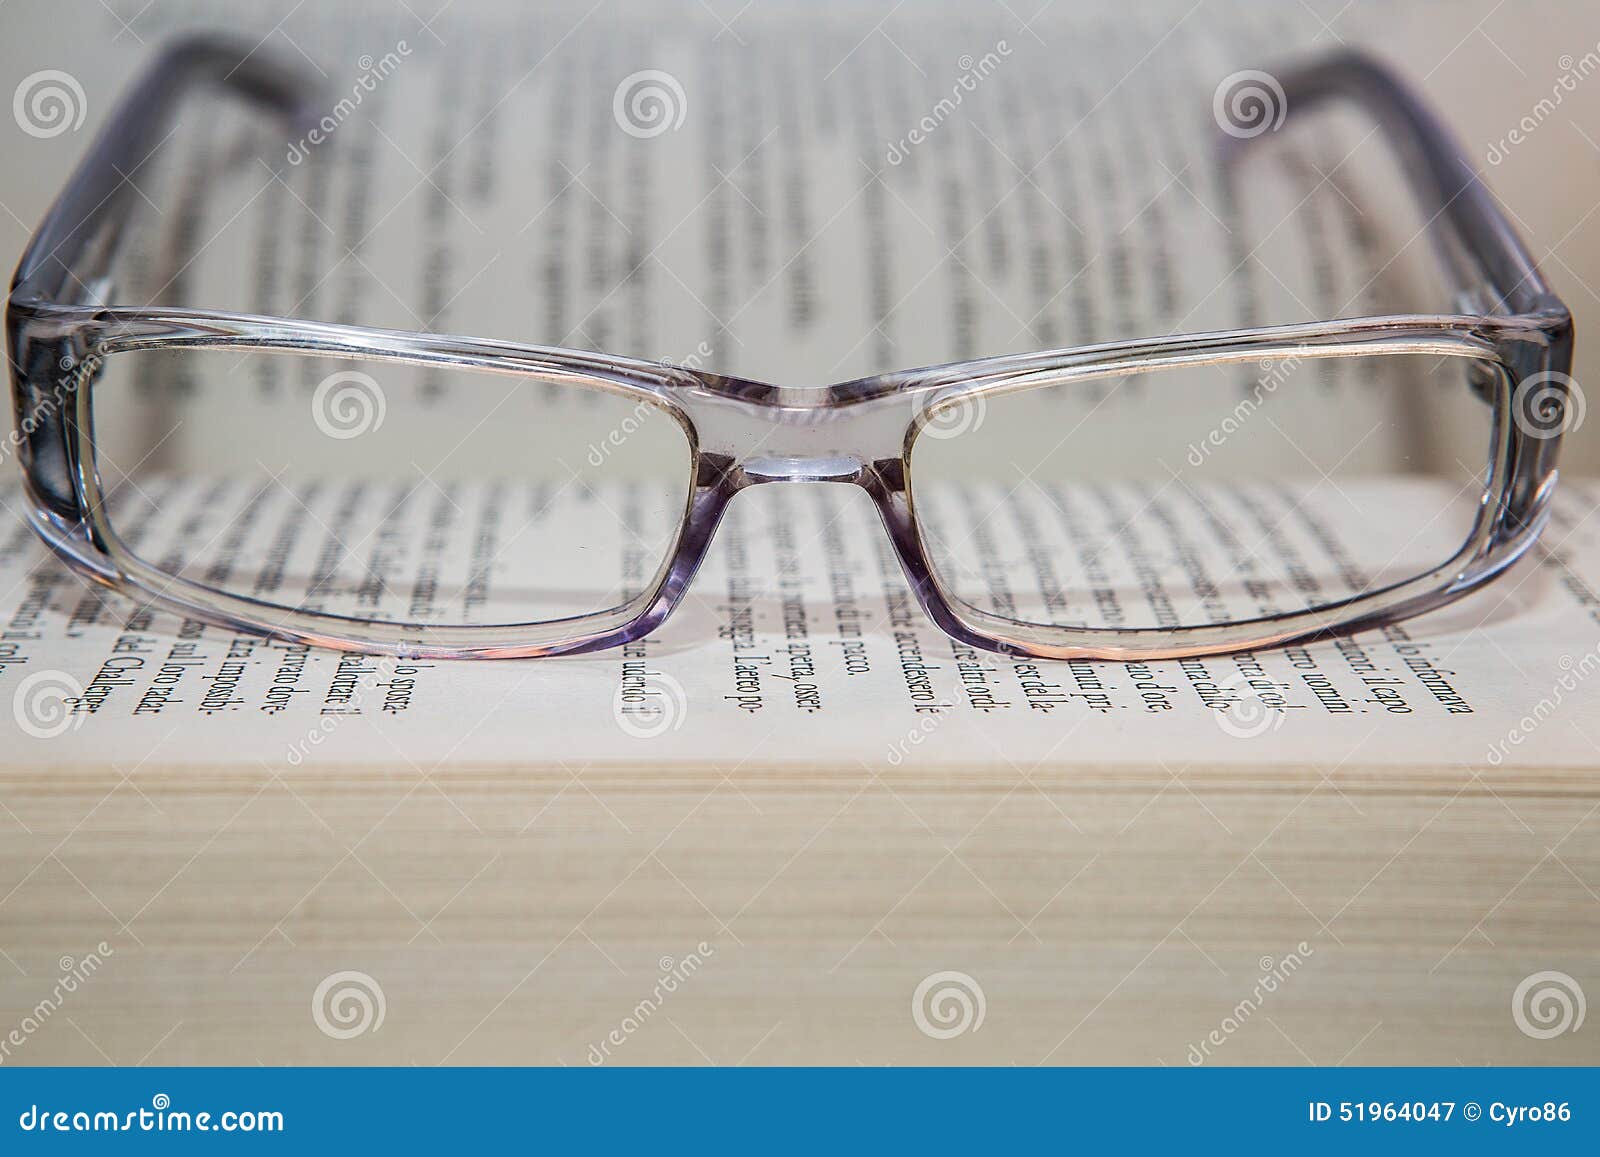 eyeglasses with book